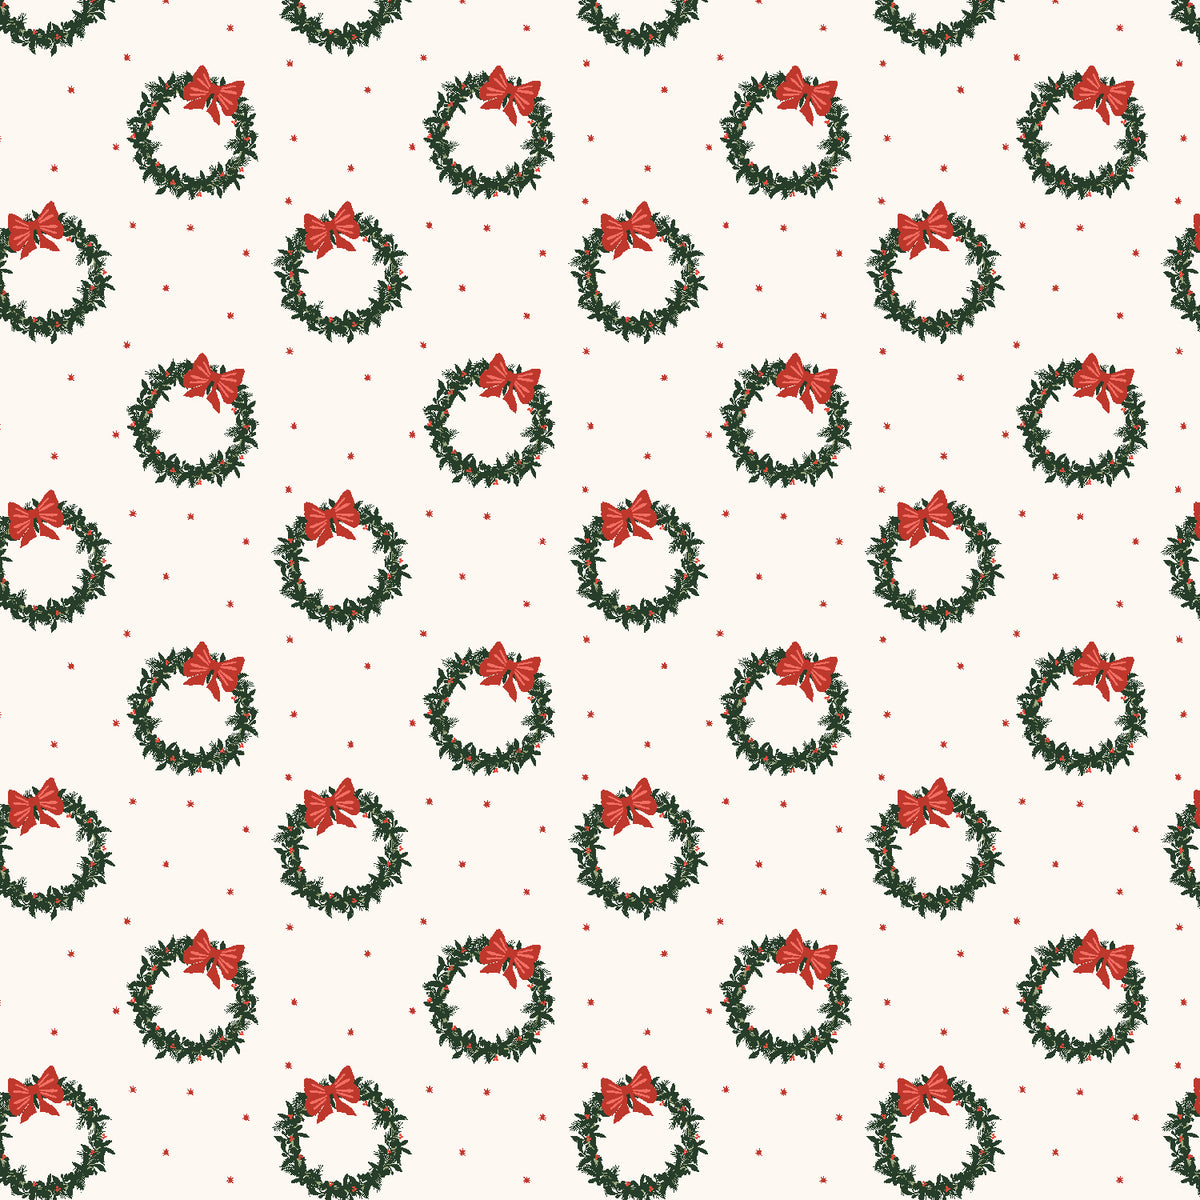 Tinsel on the Trail Quilt Fabric by Cotton+Steel - Wreath in Noel (Cream/Dark Green) - AC601-NO1